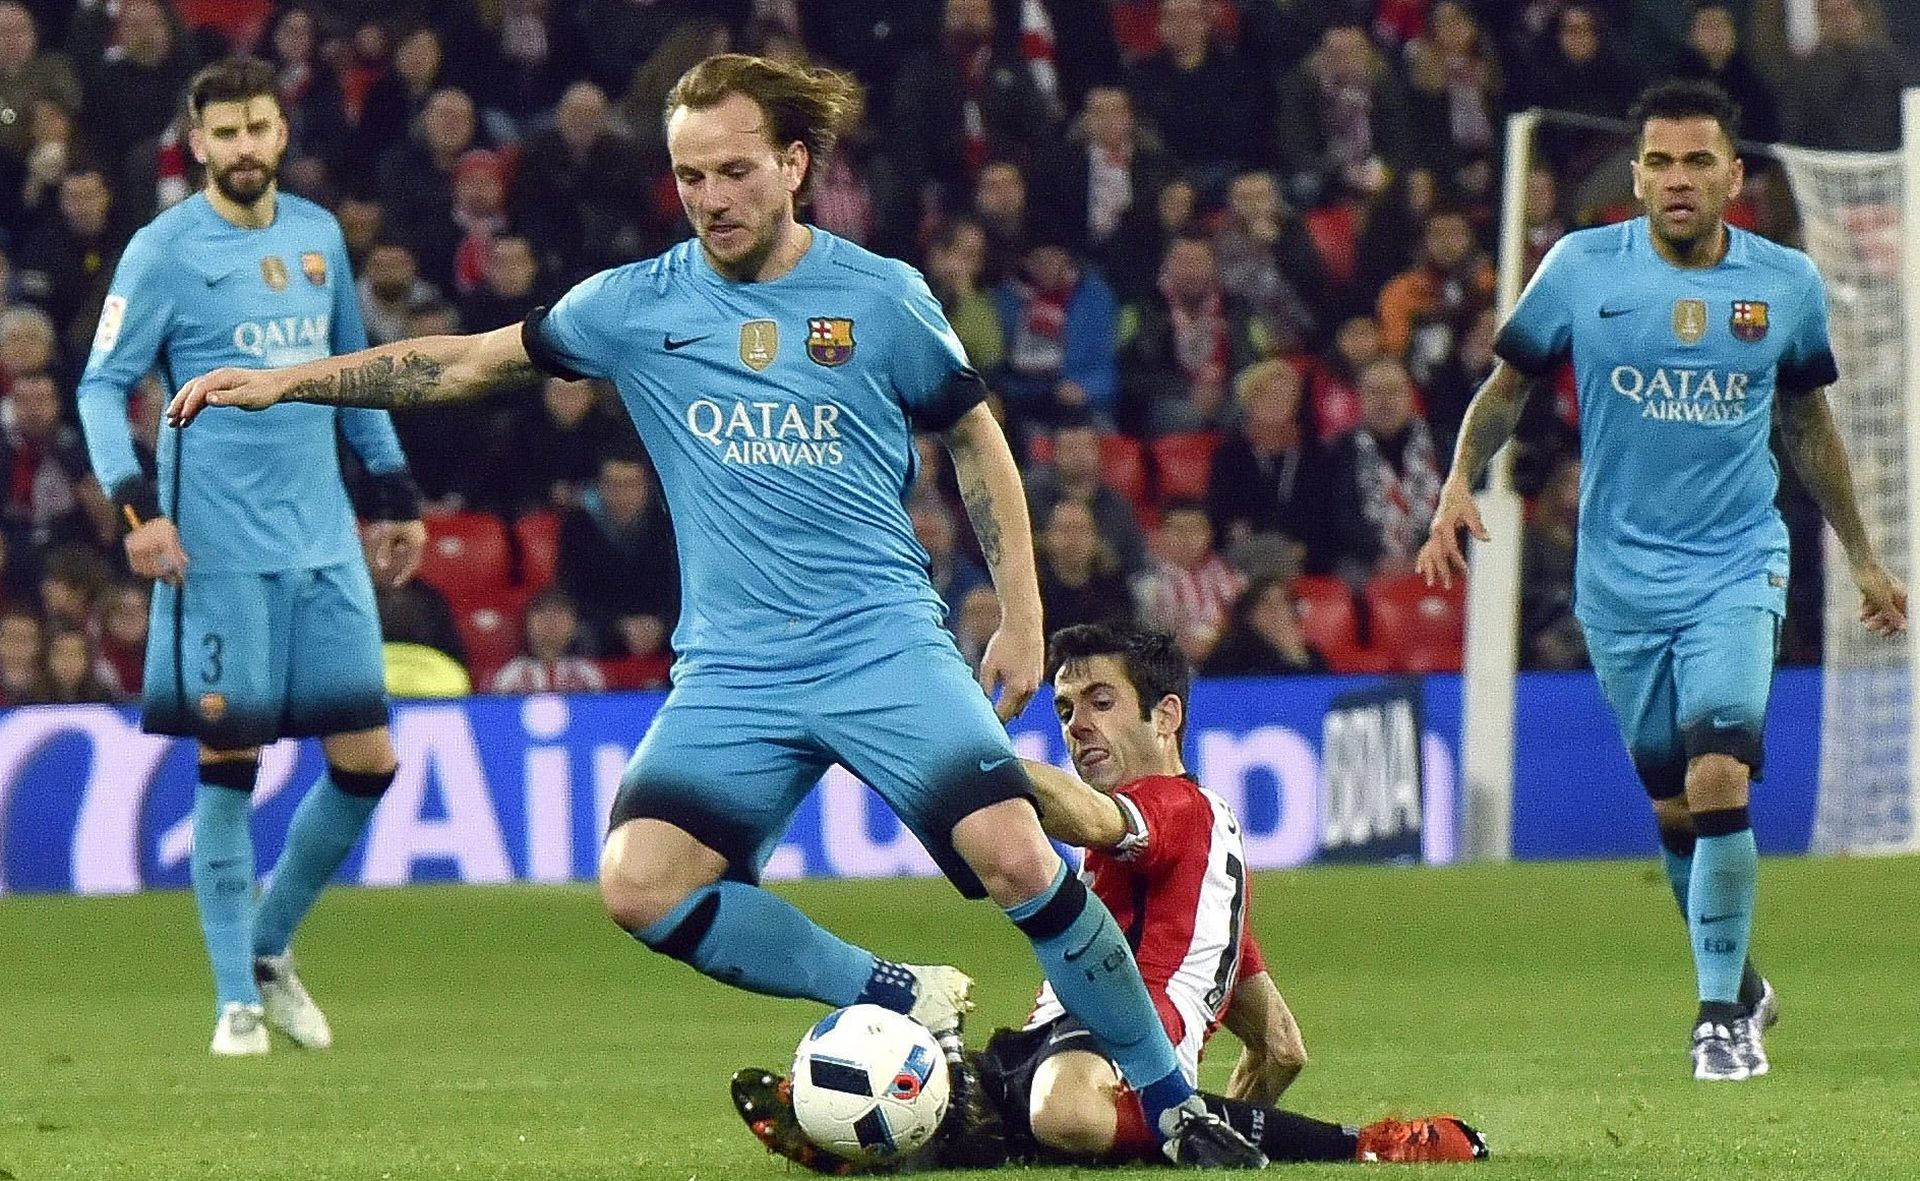 epa05114414 Athletic Club's midfielder Markel Susaeta (2R) in action against FC Barcelona's Croatian midfielder Ivan Rakitic (2L) during their Spanish King's Cup quarter finals first leg soccer match played at San Mames stadium, in Bilbao, northern Spain, 20 January 2016.  EPA/LUIS TEJIDO